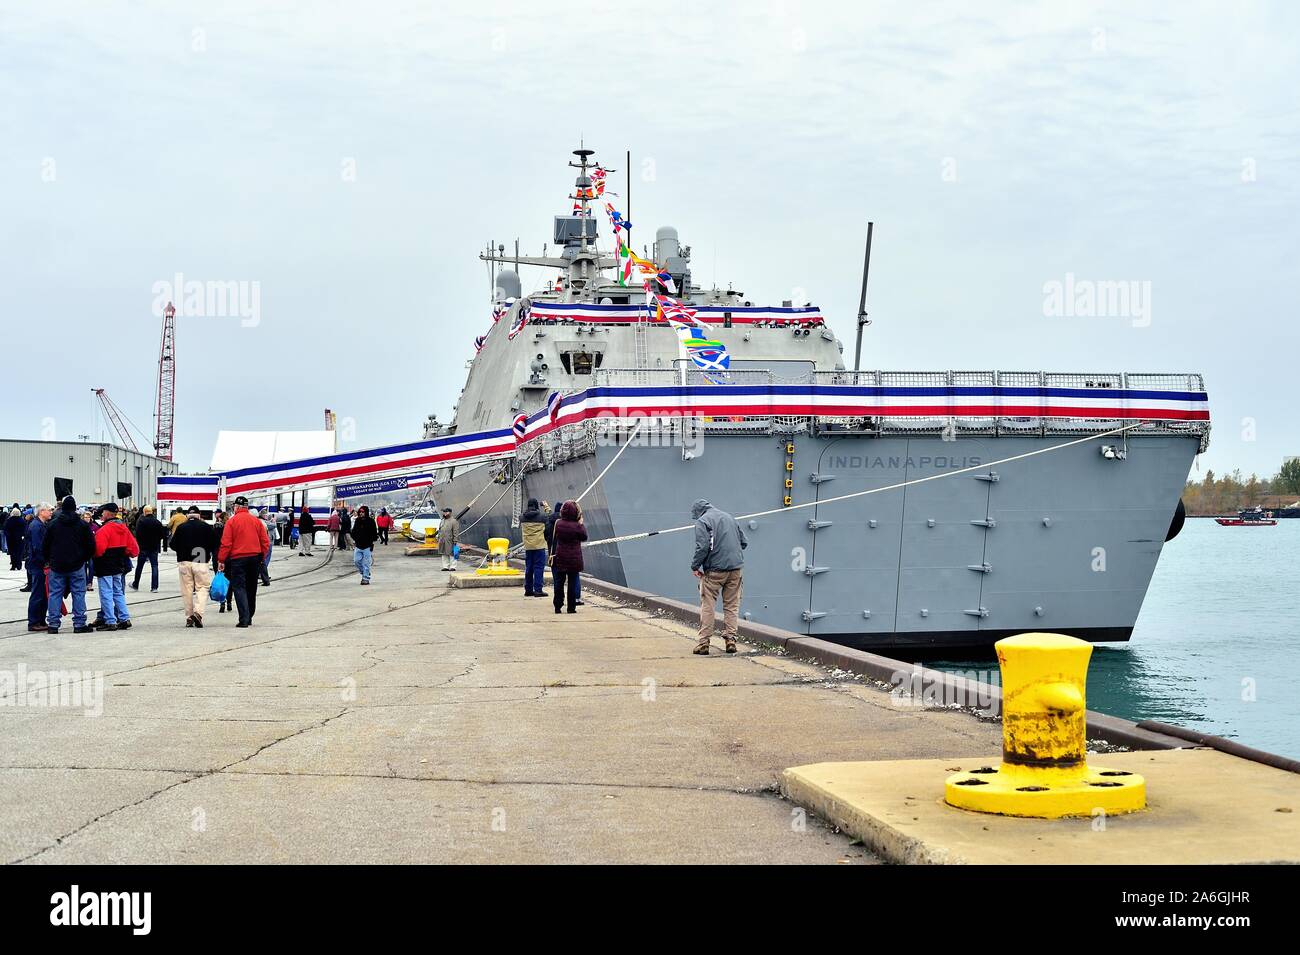 Burns Harbor, Indiana. The U.S.S. Indianapolis at its commissioning ceremony on Oct. 26, 2019. Stock Photo